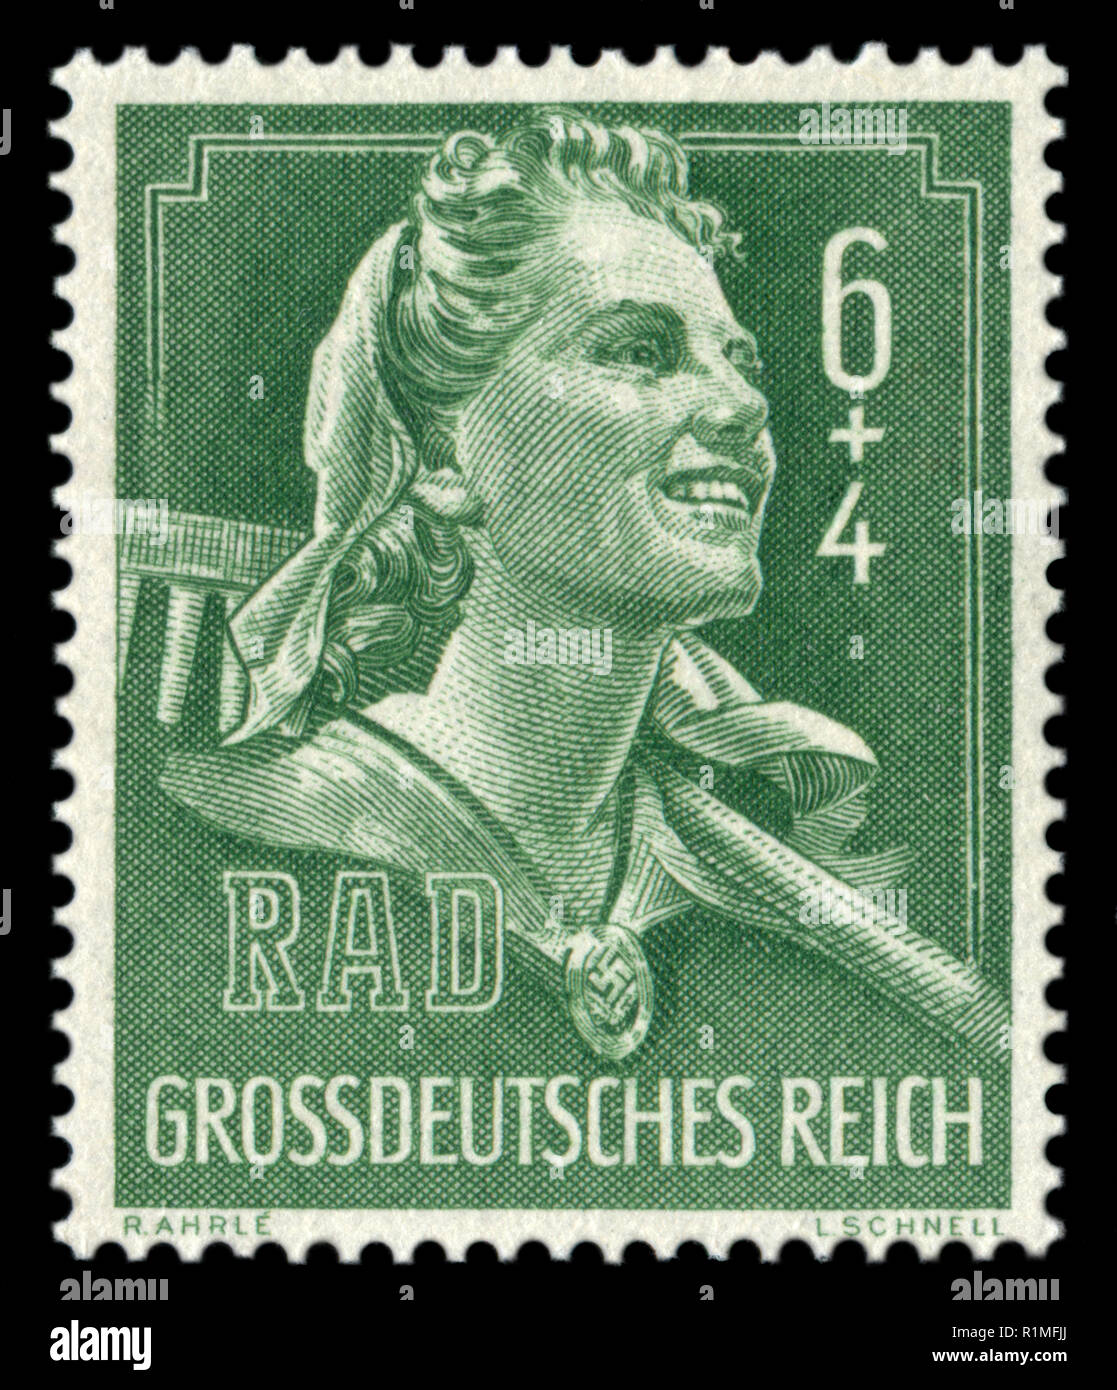 German postage stamp: Woman RAD service worker in uniform with a rake on his shoulders, fair labor brigades, 1944, Germany, the Third Reich, ww2 Stock Photo